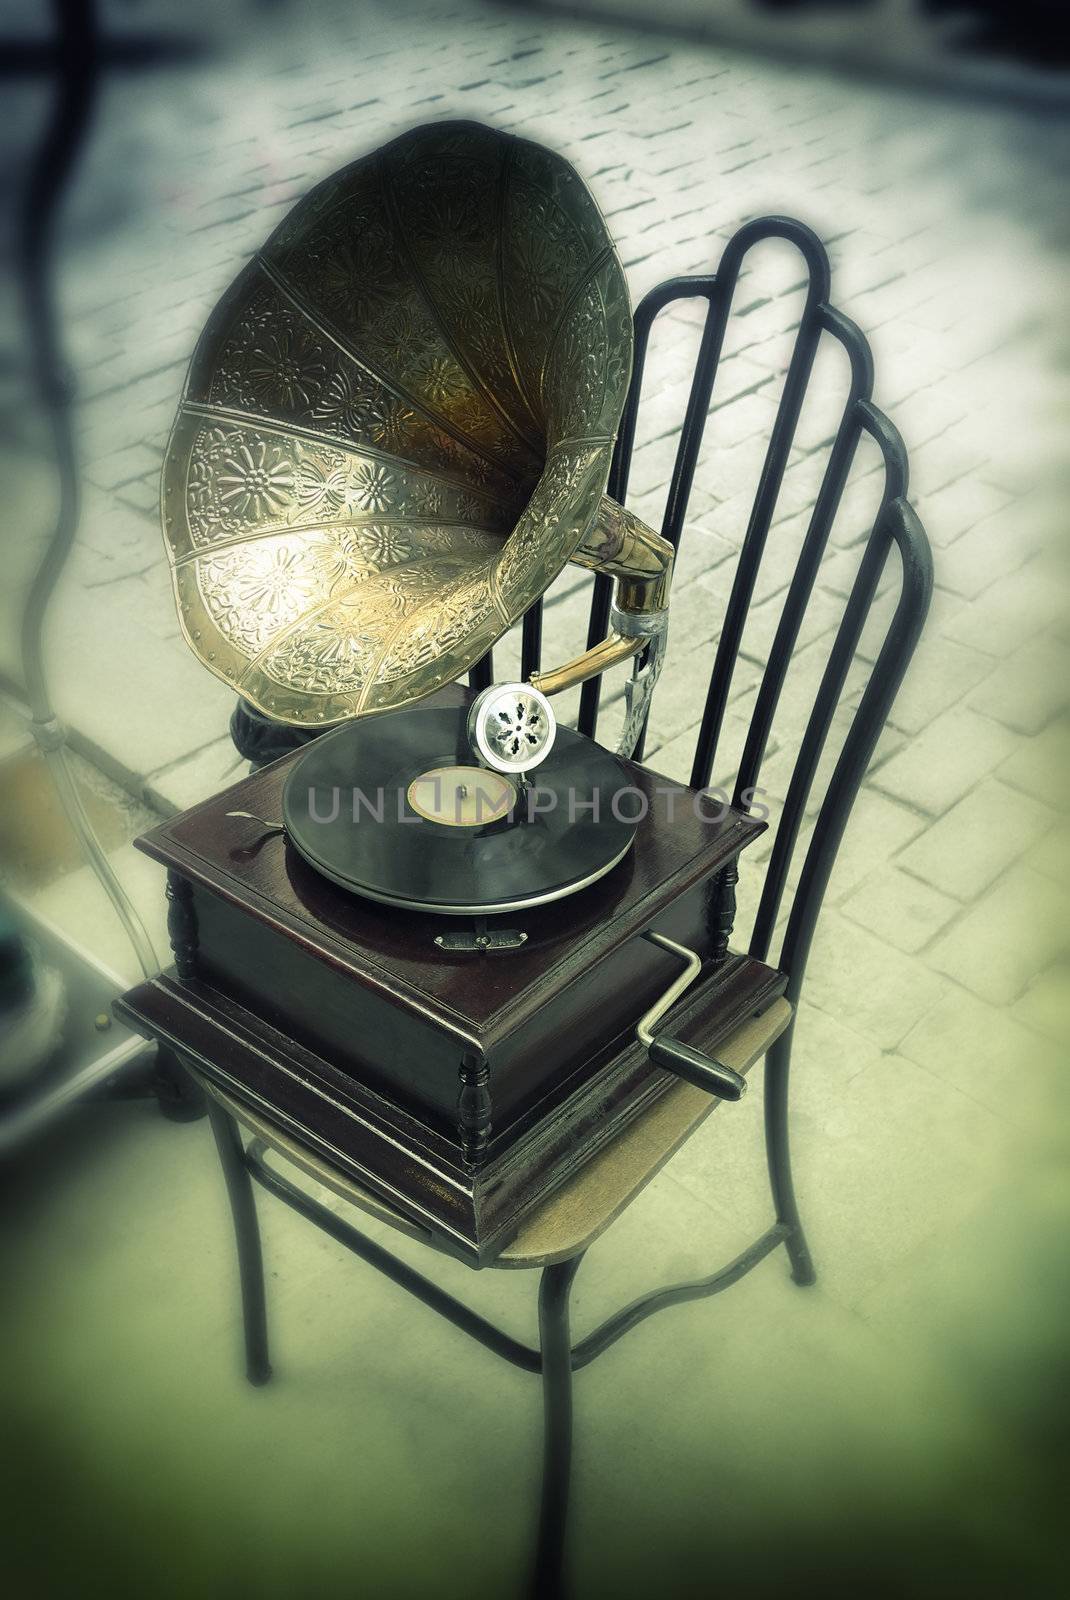 Antique gramophone with horn speaker for sale - Istanbul, Turkey.